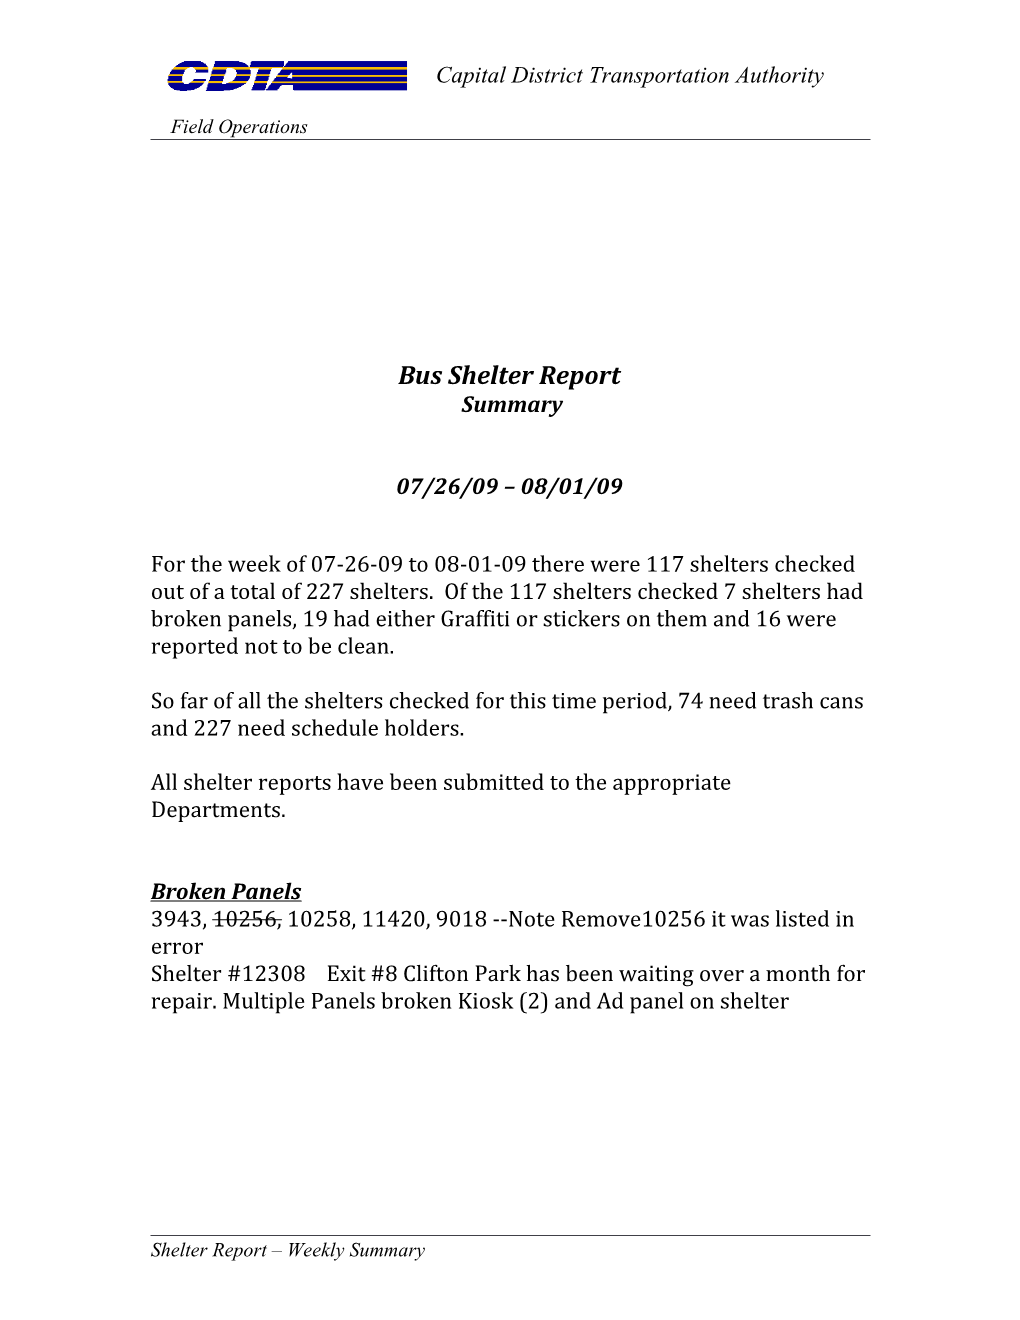 Bus Shelter Report